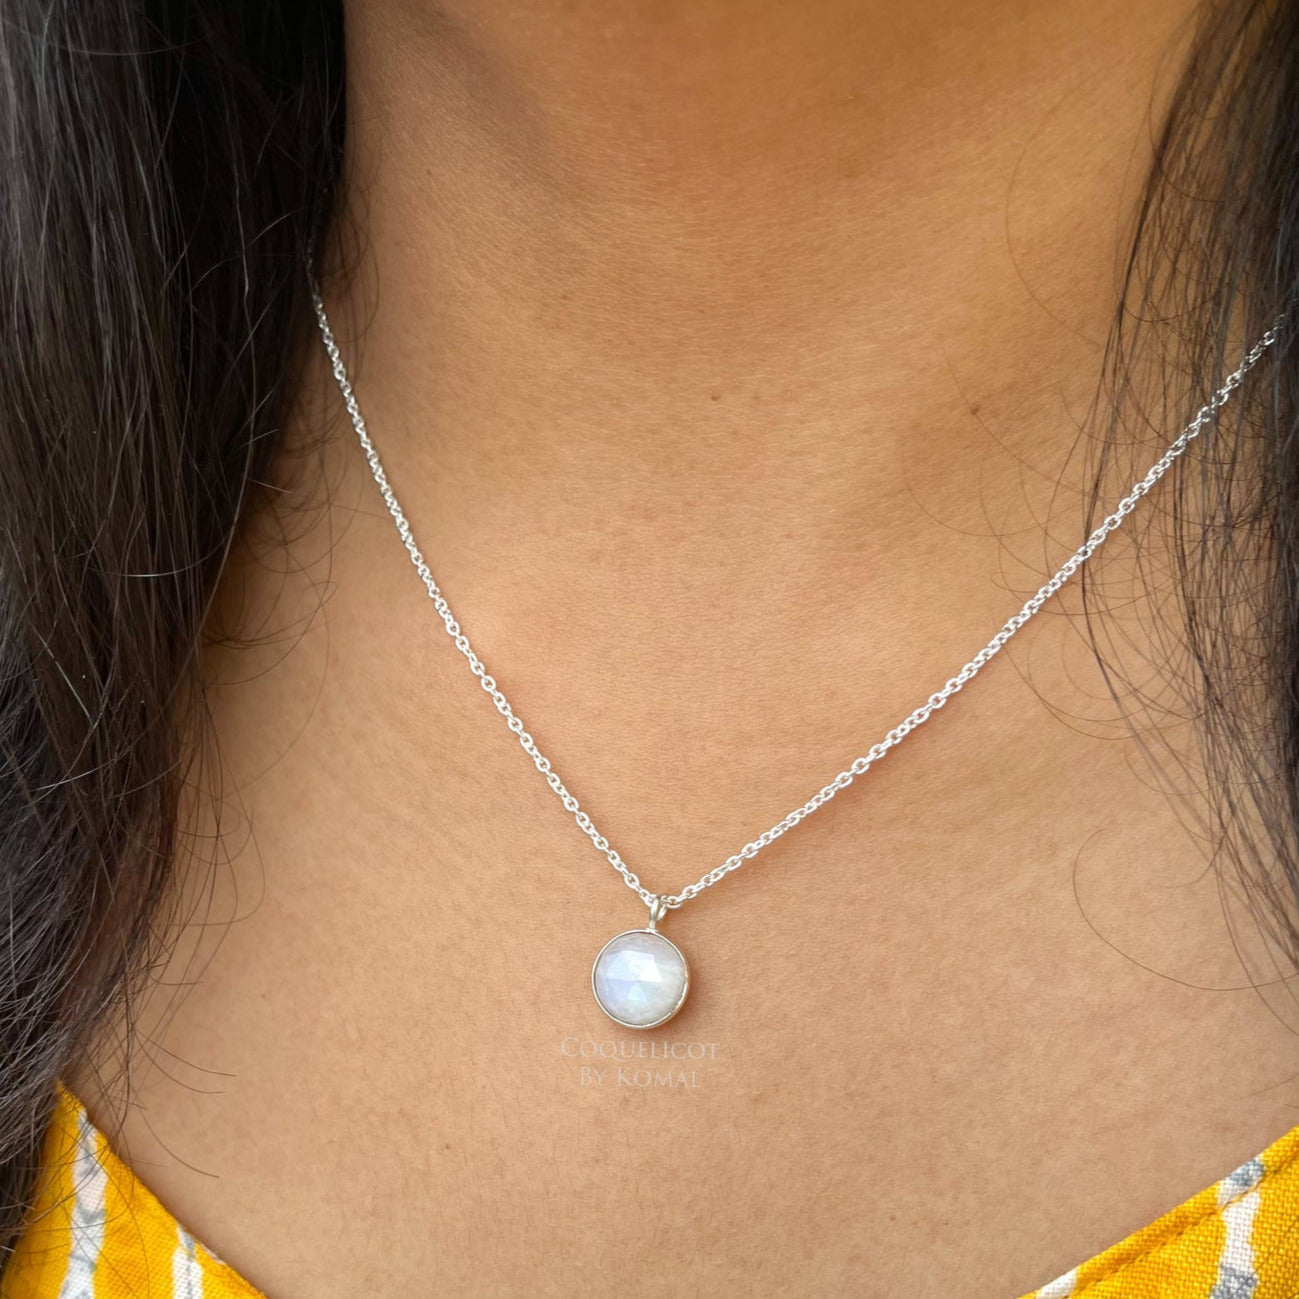 Solid Gold Moonstone Pearl Necklace – Yifat Bareket Jewelry Designs